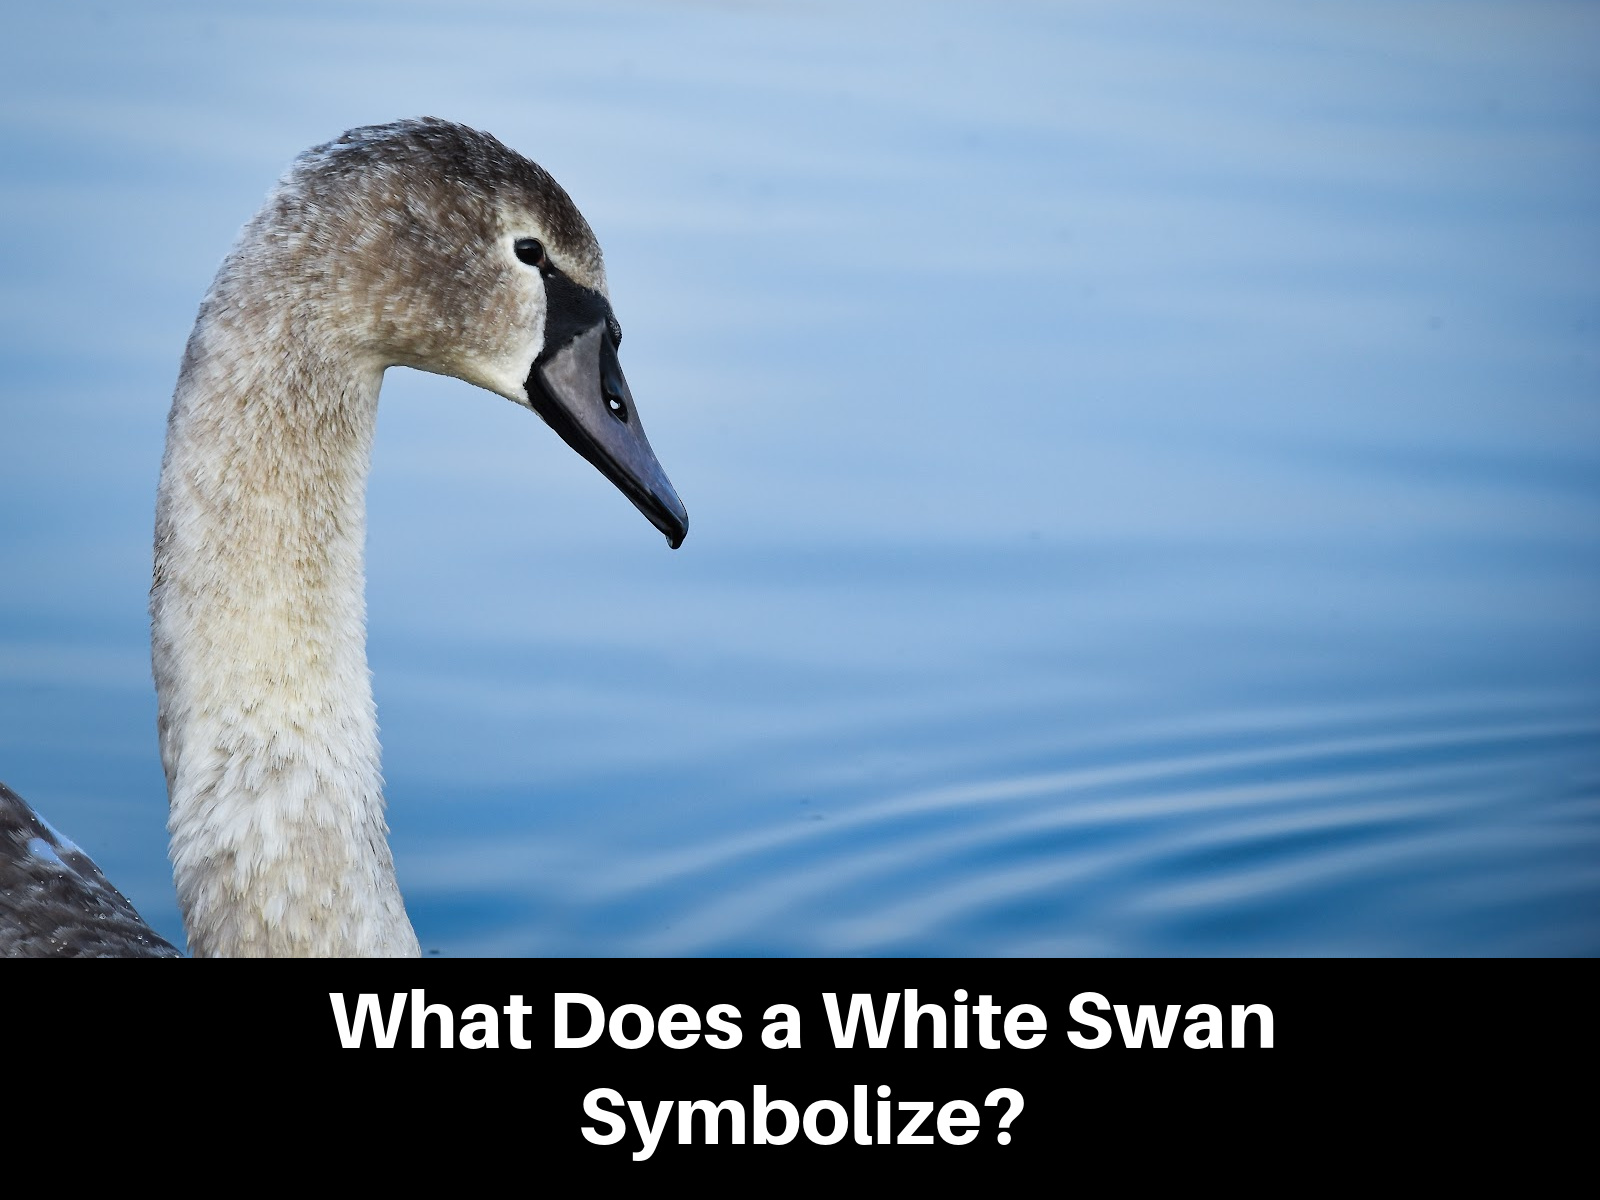 What Does a White Swan Symbolize?